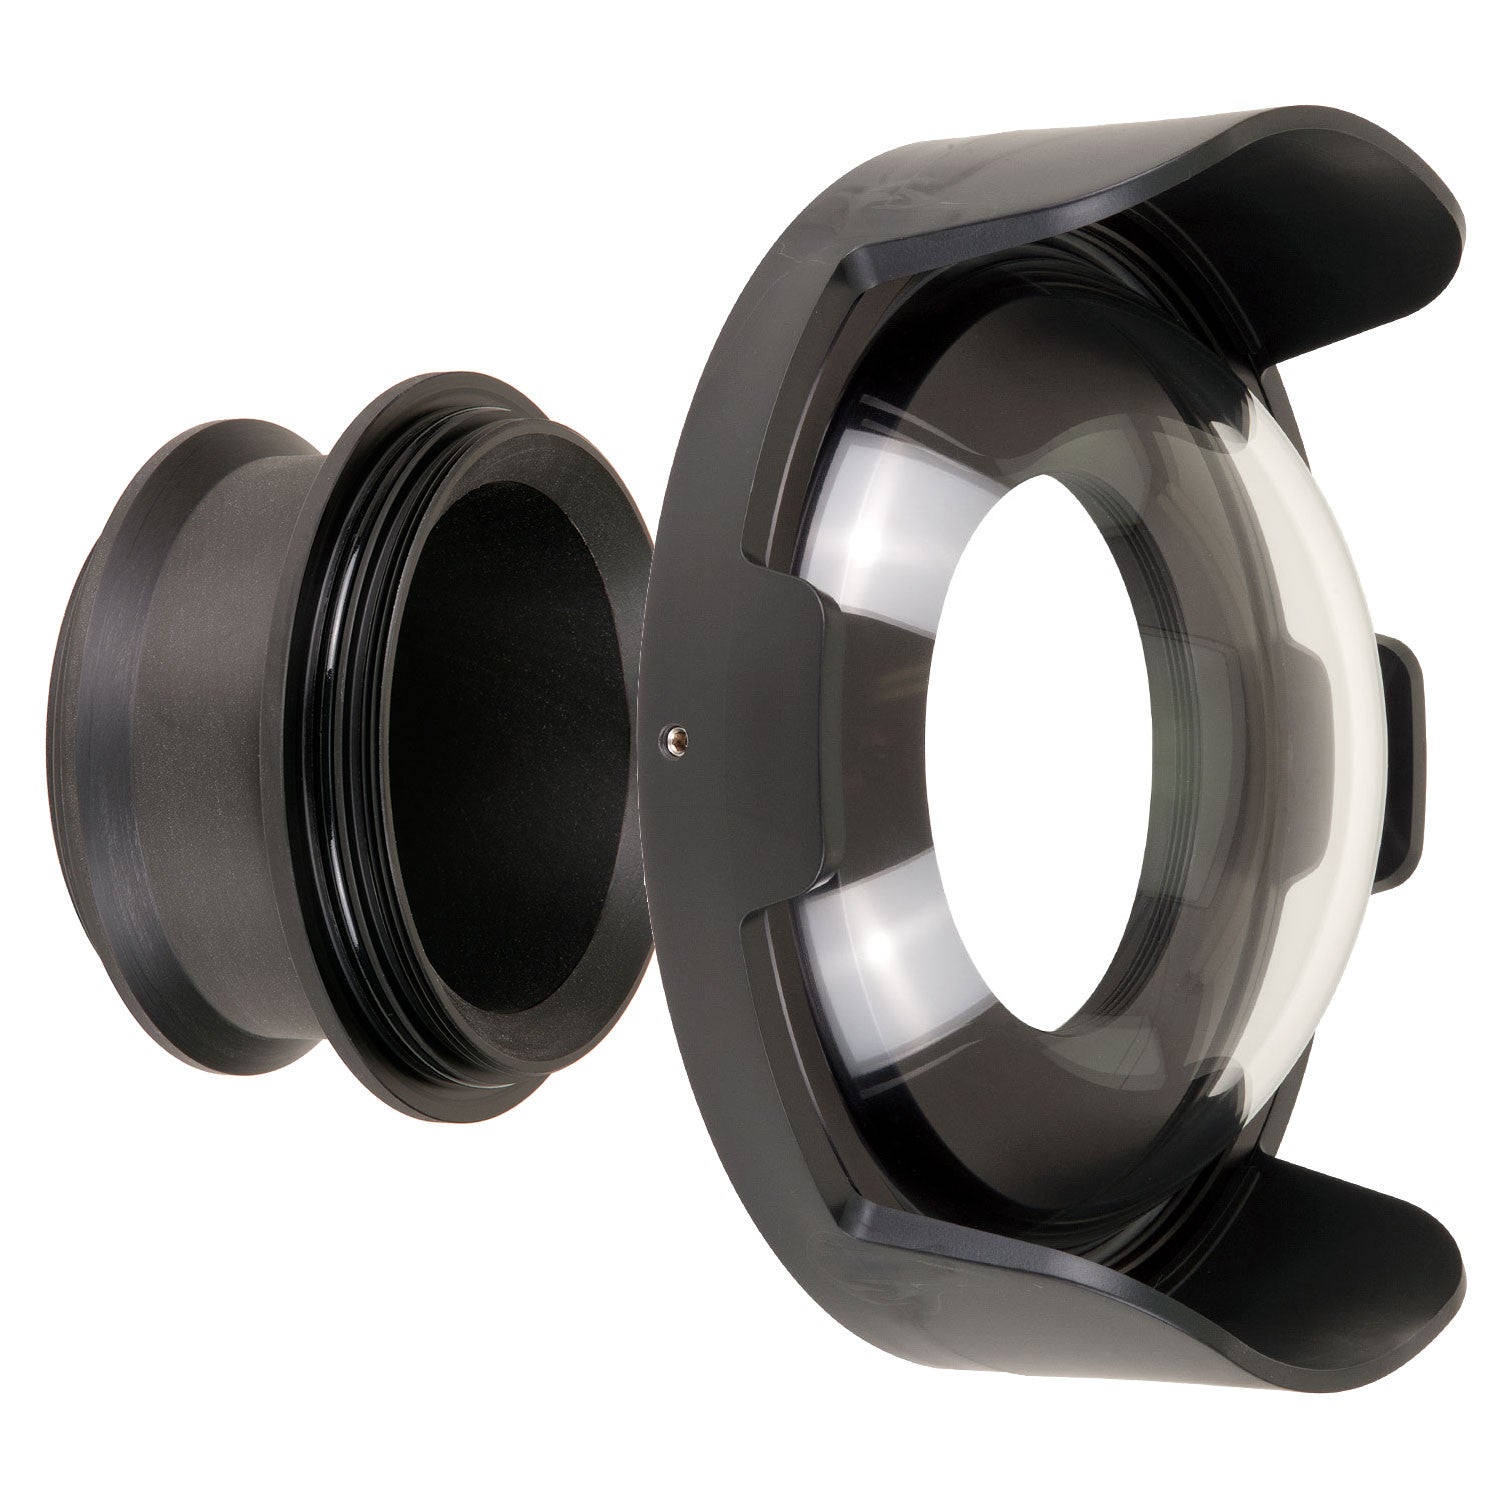 FL 8 inch Dome Kit for Lenses Up To 4.125 Inches